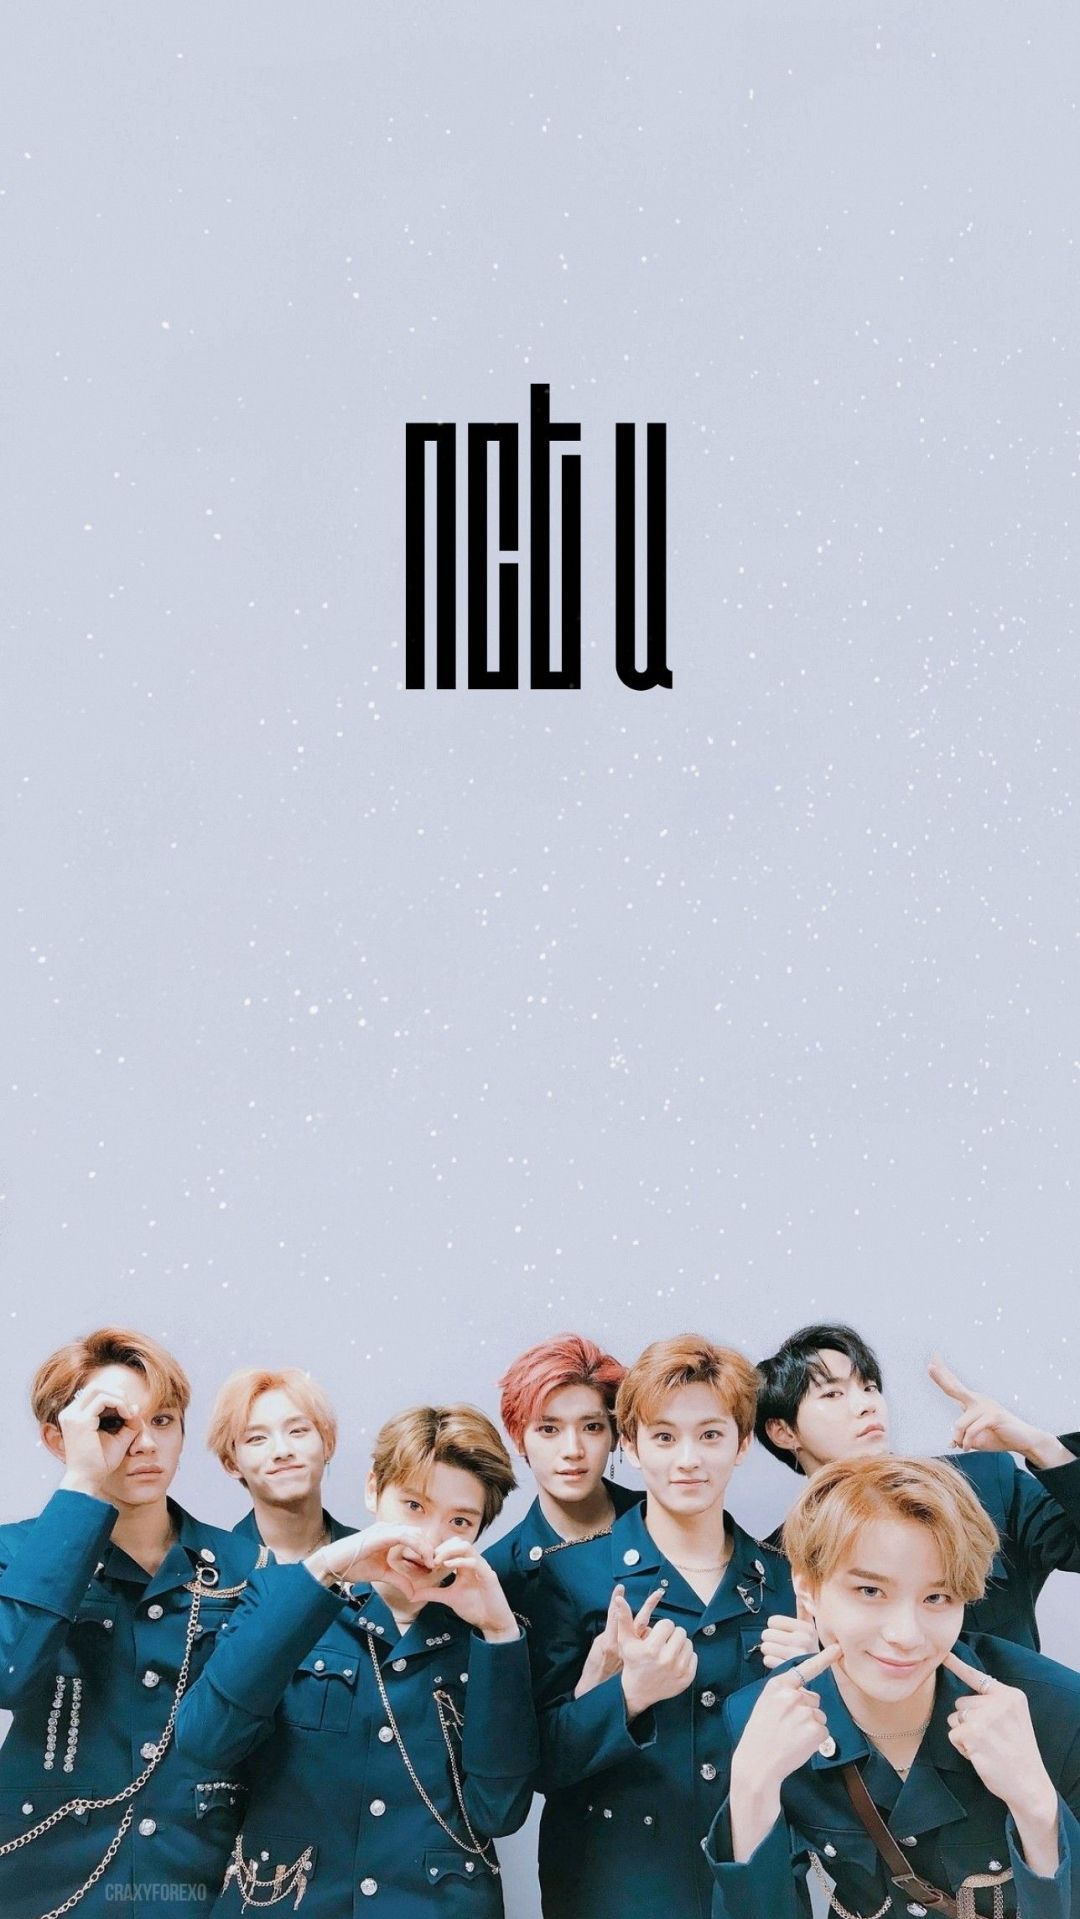 NCT Aesthetic HD Wallpaper (Desktop Background / Android / iPhone) (1080p, 4k) (1288x2289) (2020)